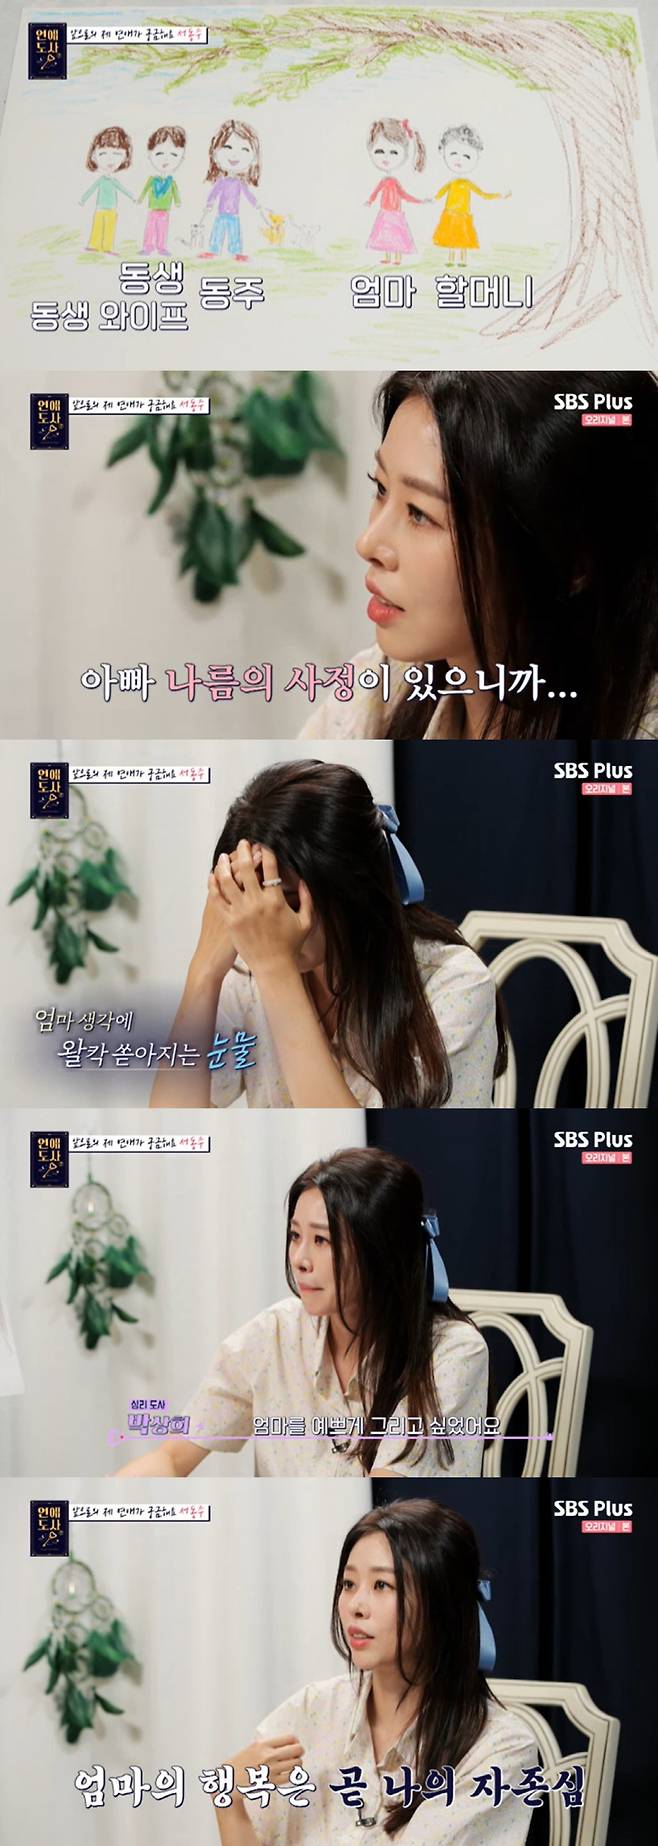 Love Dosa Seo Dong-jooo showed tears as she hoped for the happiness of her mother Seo Jeong-Hee.In the SBS Plus entertainment program Love Dosa broadcasted on the 4th, broadcaster and lawyer Seo Dong-jooo appeared as a guest.On the day, Seo Dong-jooo frankly Confessions said he was riding a thumb: Whens the last love? he asked, I cant lie.I am always doing Date. Im riding a thumb, said the prodigy at the Seo Dong-jooo, who defined it as a ride on a thumb, and Seo Dong-jooo replied, Yes.Sajudo, who met Seo Dong-jooo, said, I was not lucky overall, but there are times when I collapsed.Sigi, who has a lot of stories to break down good luck after 31 ~ 33 years old. So Seo Dong-jooo said, It was Sigi who was the age who did the duty and the parents separated.Sigi, who had a strong feeling of Alone, Confessions said.After the divorce, Seo Dong-jooo did a lot of work for his livelihood so that he had a dress trade with his friend at the flea market.But Seo Dong-jooo couldnt tell the hard story because she was worried about her mother Seo Jeong-Hee.Seo Dong-jooo said, My mother has to be an Alone and have an independent life, and my mentality has collapsed, but I can not talk about it.My mother was so angry when I felt difficult, and she was angry and angry, and I was not talking to her well. Seo Dong-jooo, who met the next psychological instructor, painted a family picture in front of the psychological master.Seo Dong-jooo painted his mother, grandmother, brother, brothers wife and dog in the picture, but his father Seo Se-won did not draw it.The psychologist asked, Did you want to do it? And Seo Dong-joo replied, I did not want to do it, but now I have another family, so I thought I belonged there.The psychologist then asked, Who did you care about when you painted? And Seo Dong-jooo responded Mom and showed tears.Seo Dong-jooo painted her mother most carefully when she painted her picture, so she talked about her mother to herself.Seo Dong-jooo, who talked to a psychologist and did not think late, said, I could not think, but I fixed my mother the most and talked about my mother. I thought my mother was too fragile.Even if she wears it roughly, she wants to buy something pretty and always feels that Feeling, and she may not want it that way, but she feels that way.It seems that my mothers happiness is related to my pride. The evil wounds towards the mother and daughter were also Confessions.Seo Dong-jooo said, I have become accustomed to pretending to be fine because I have seen a lot of articles that we want to collapse.I hope my mother is beautiful and beautiful. 